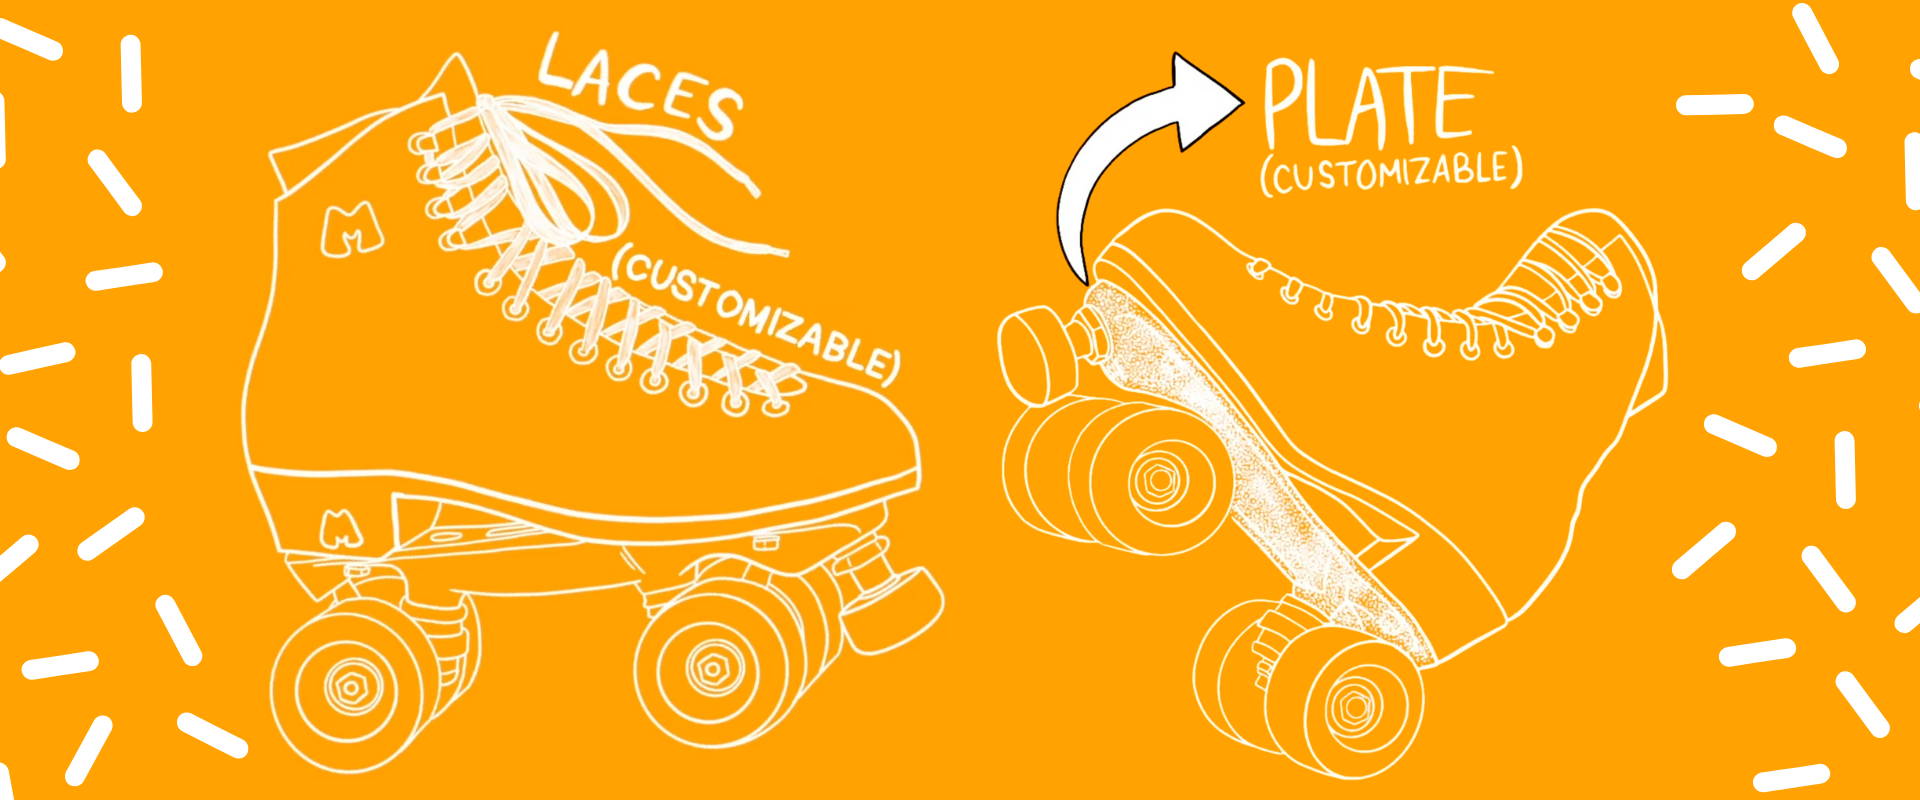 Diagram of laces and plate.